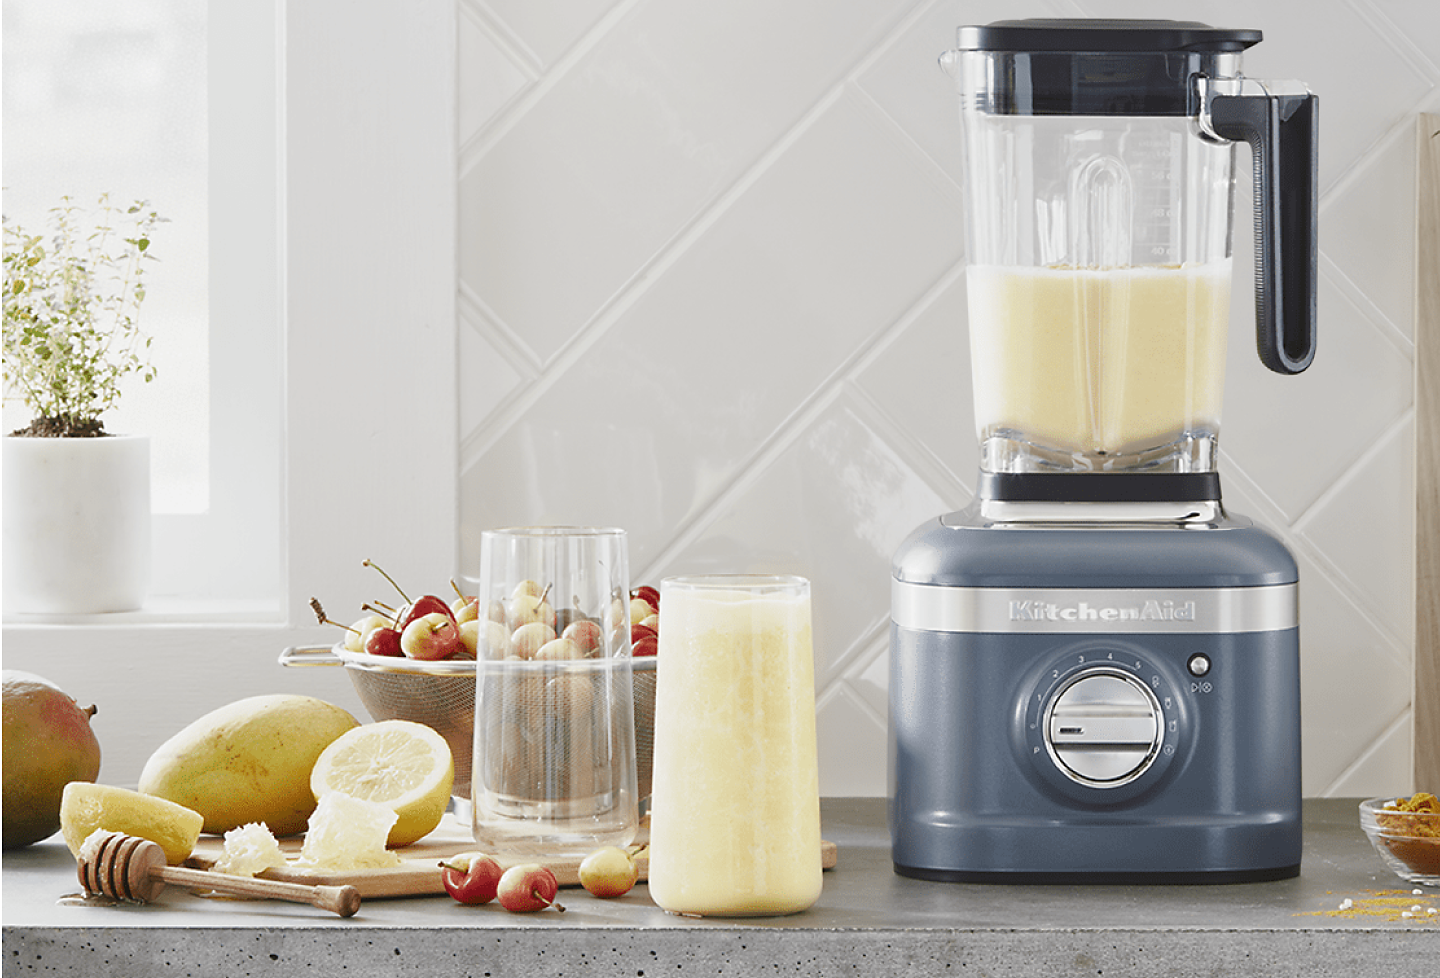 Drink in KitchenAid® blender and glass